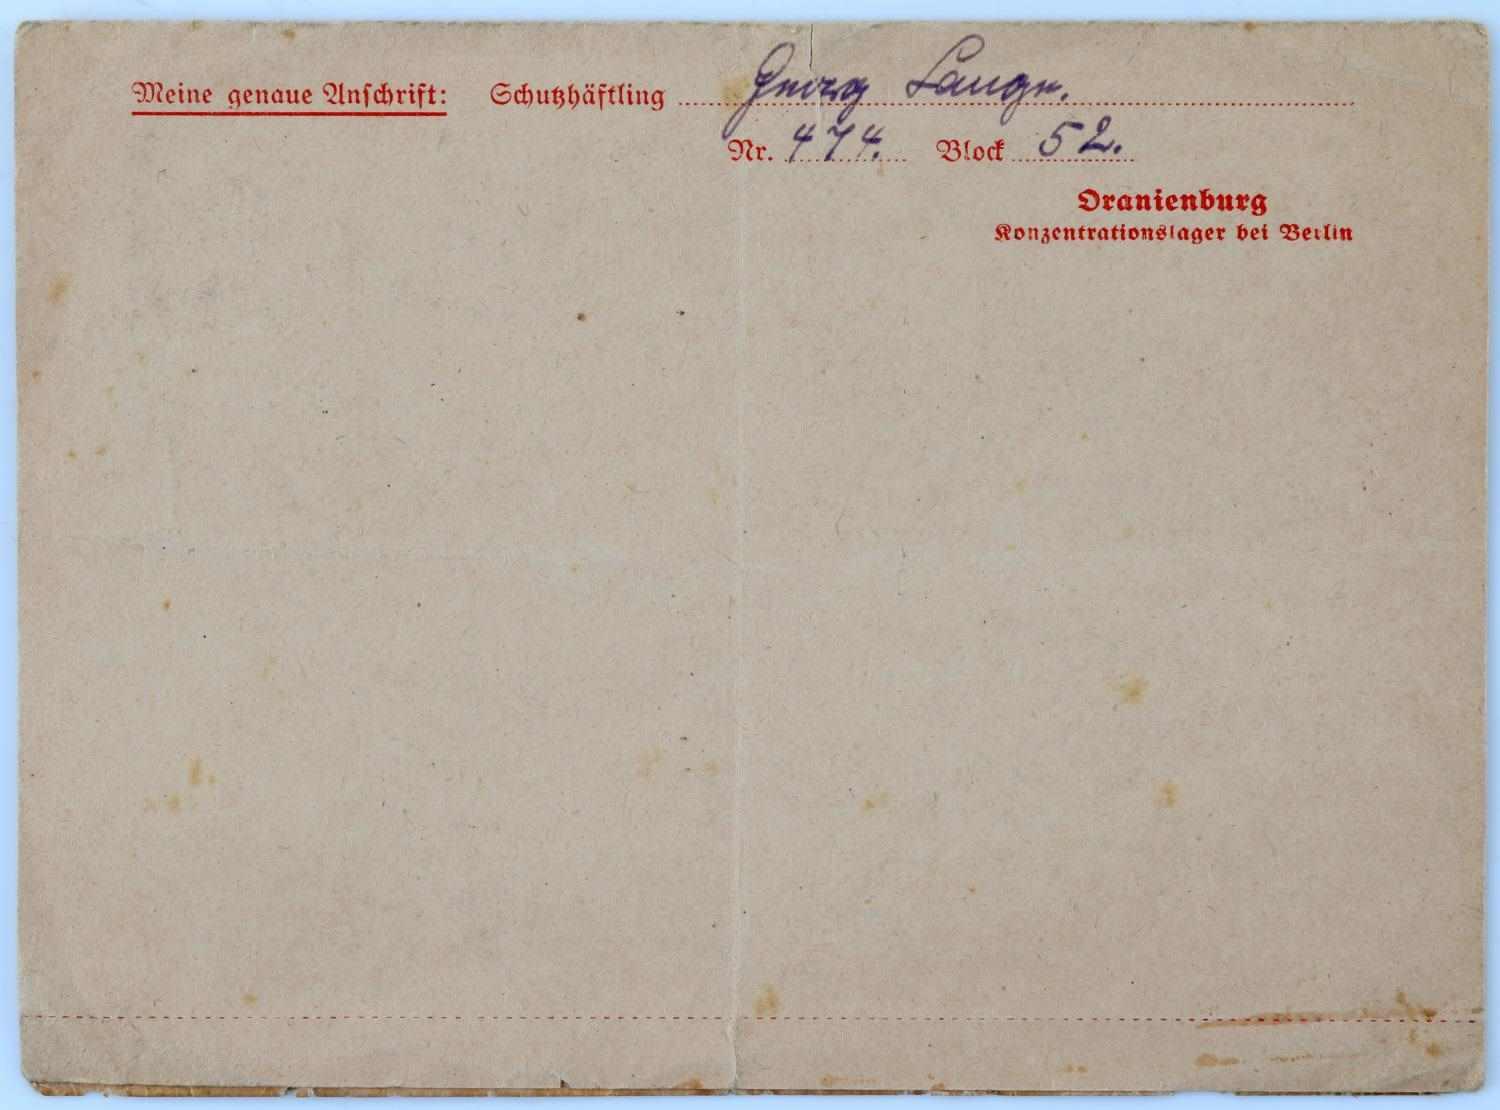 WWII CONCENTRATION CAMP LETTER SACHSENHAUSEN